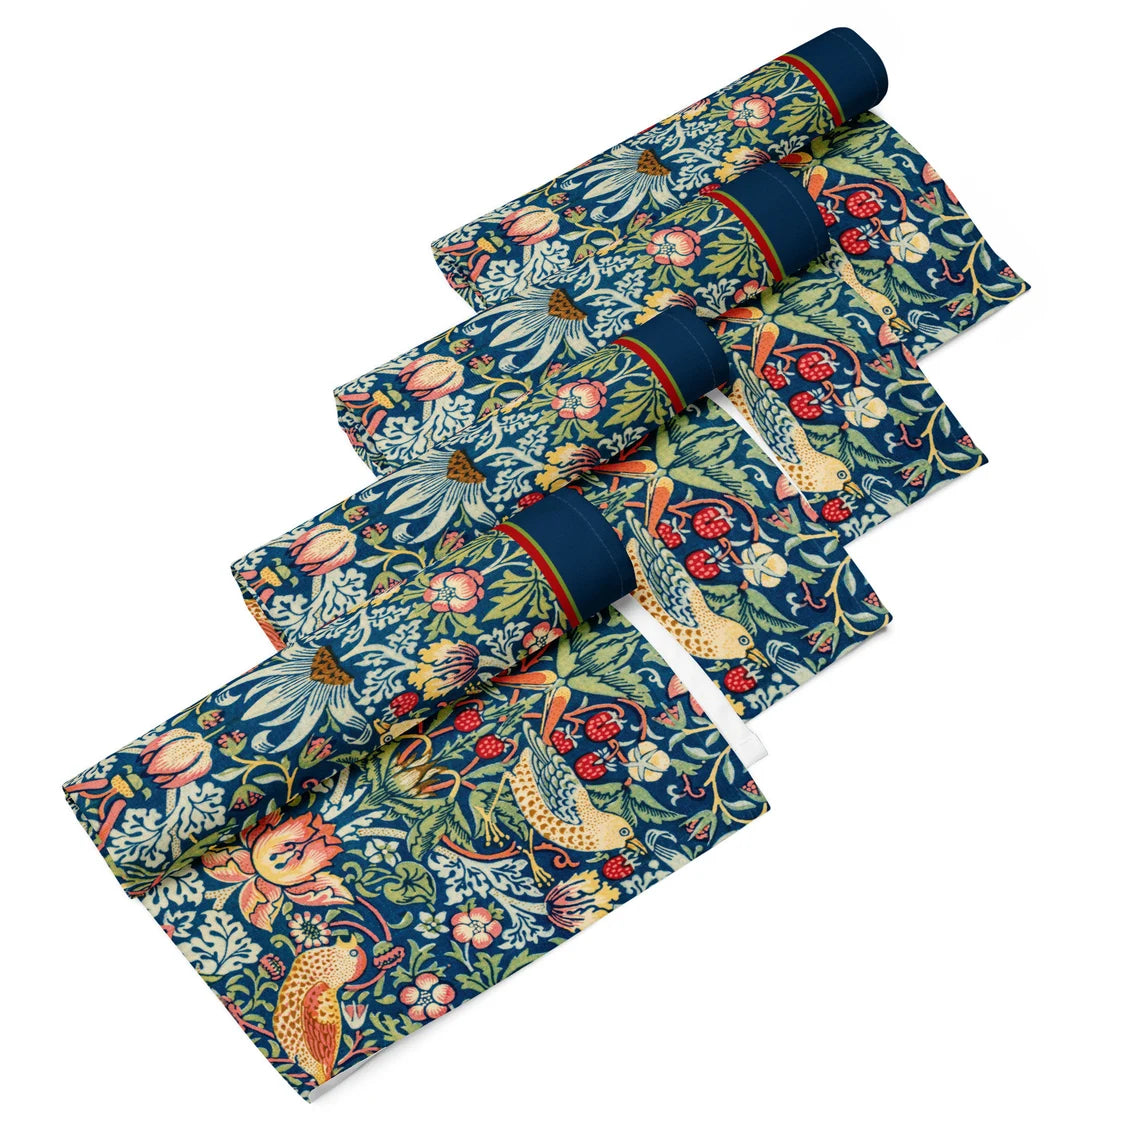 The Strawberry Thieves, William Morris Cloth Napkins, Add Charm to Your Table, 20in x 20in (50.8 cm x 50.8 cm), Set of 4 Napkins